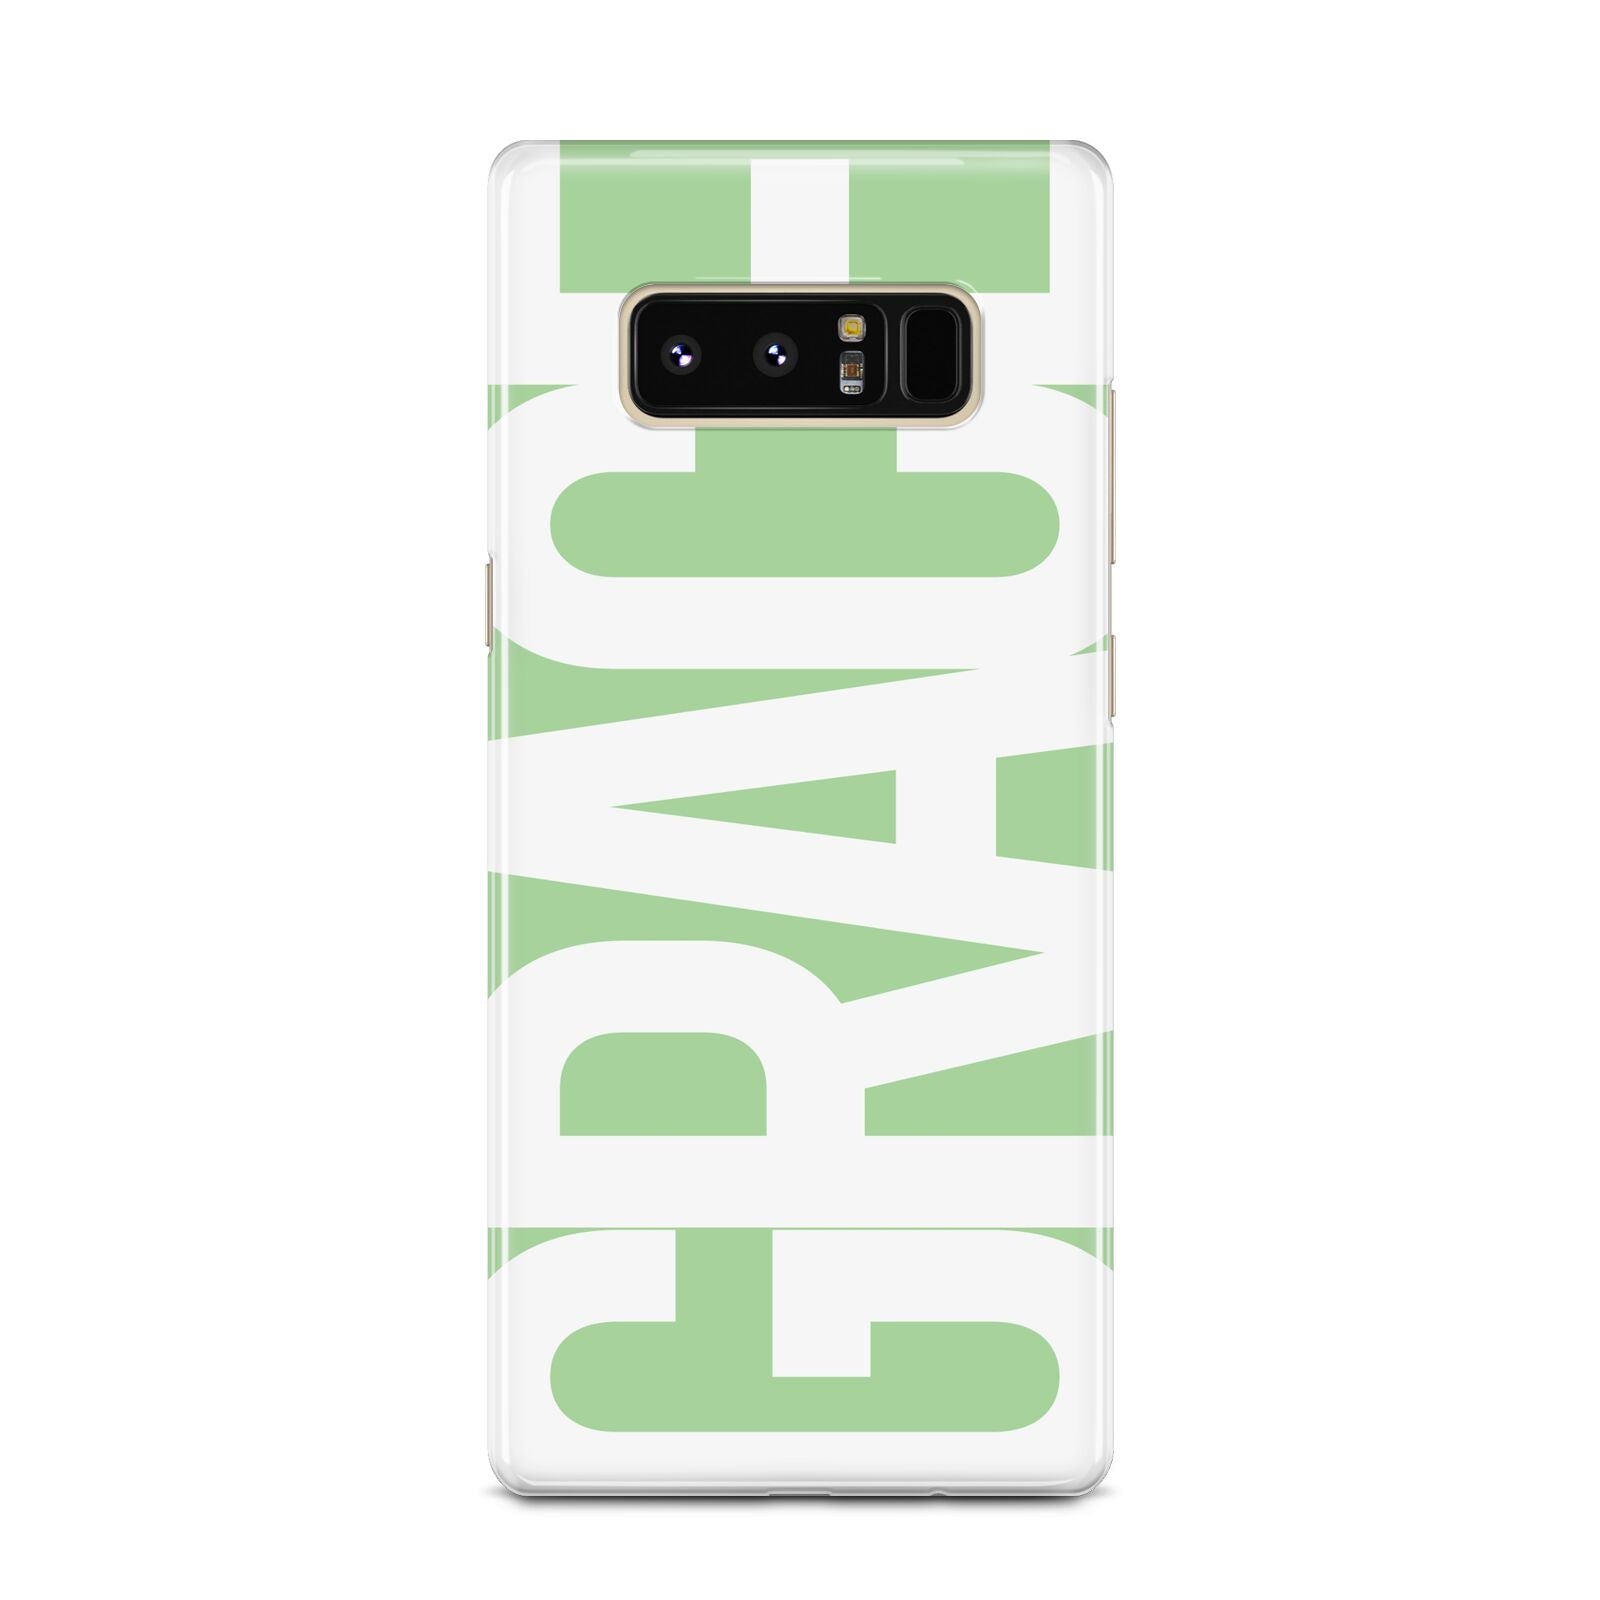 Pale Green with Bold White Text Samsung Galaxy Note 8 Case